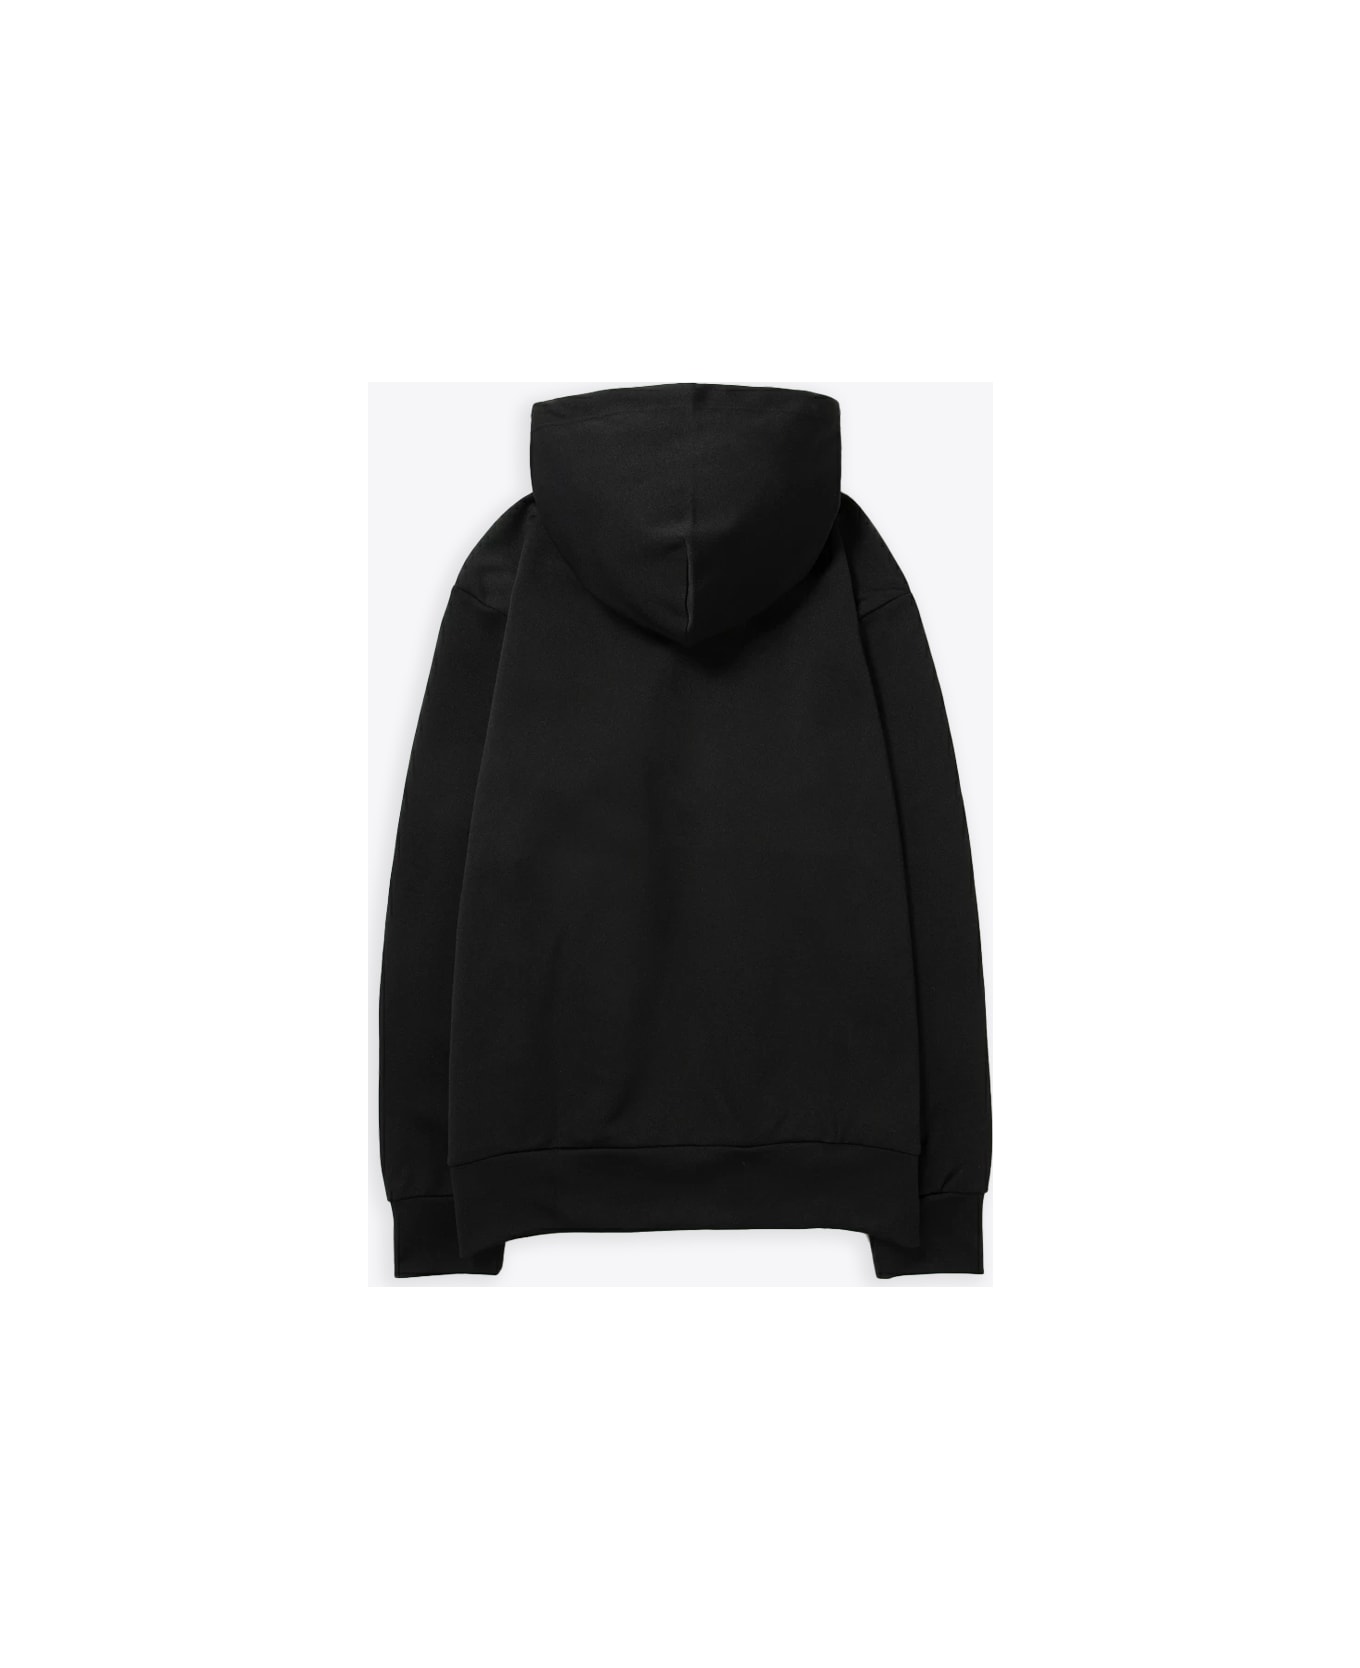 Comme des Garçons Play Mens Sweatshirt Knit Black hoodie with heart patch at chest - Nero フリース